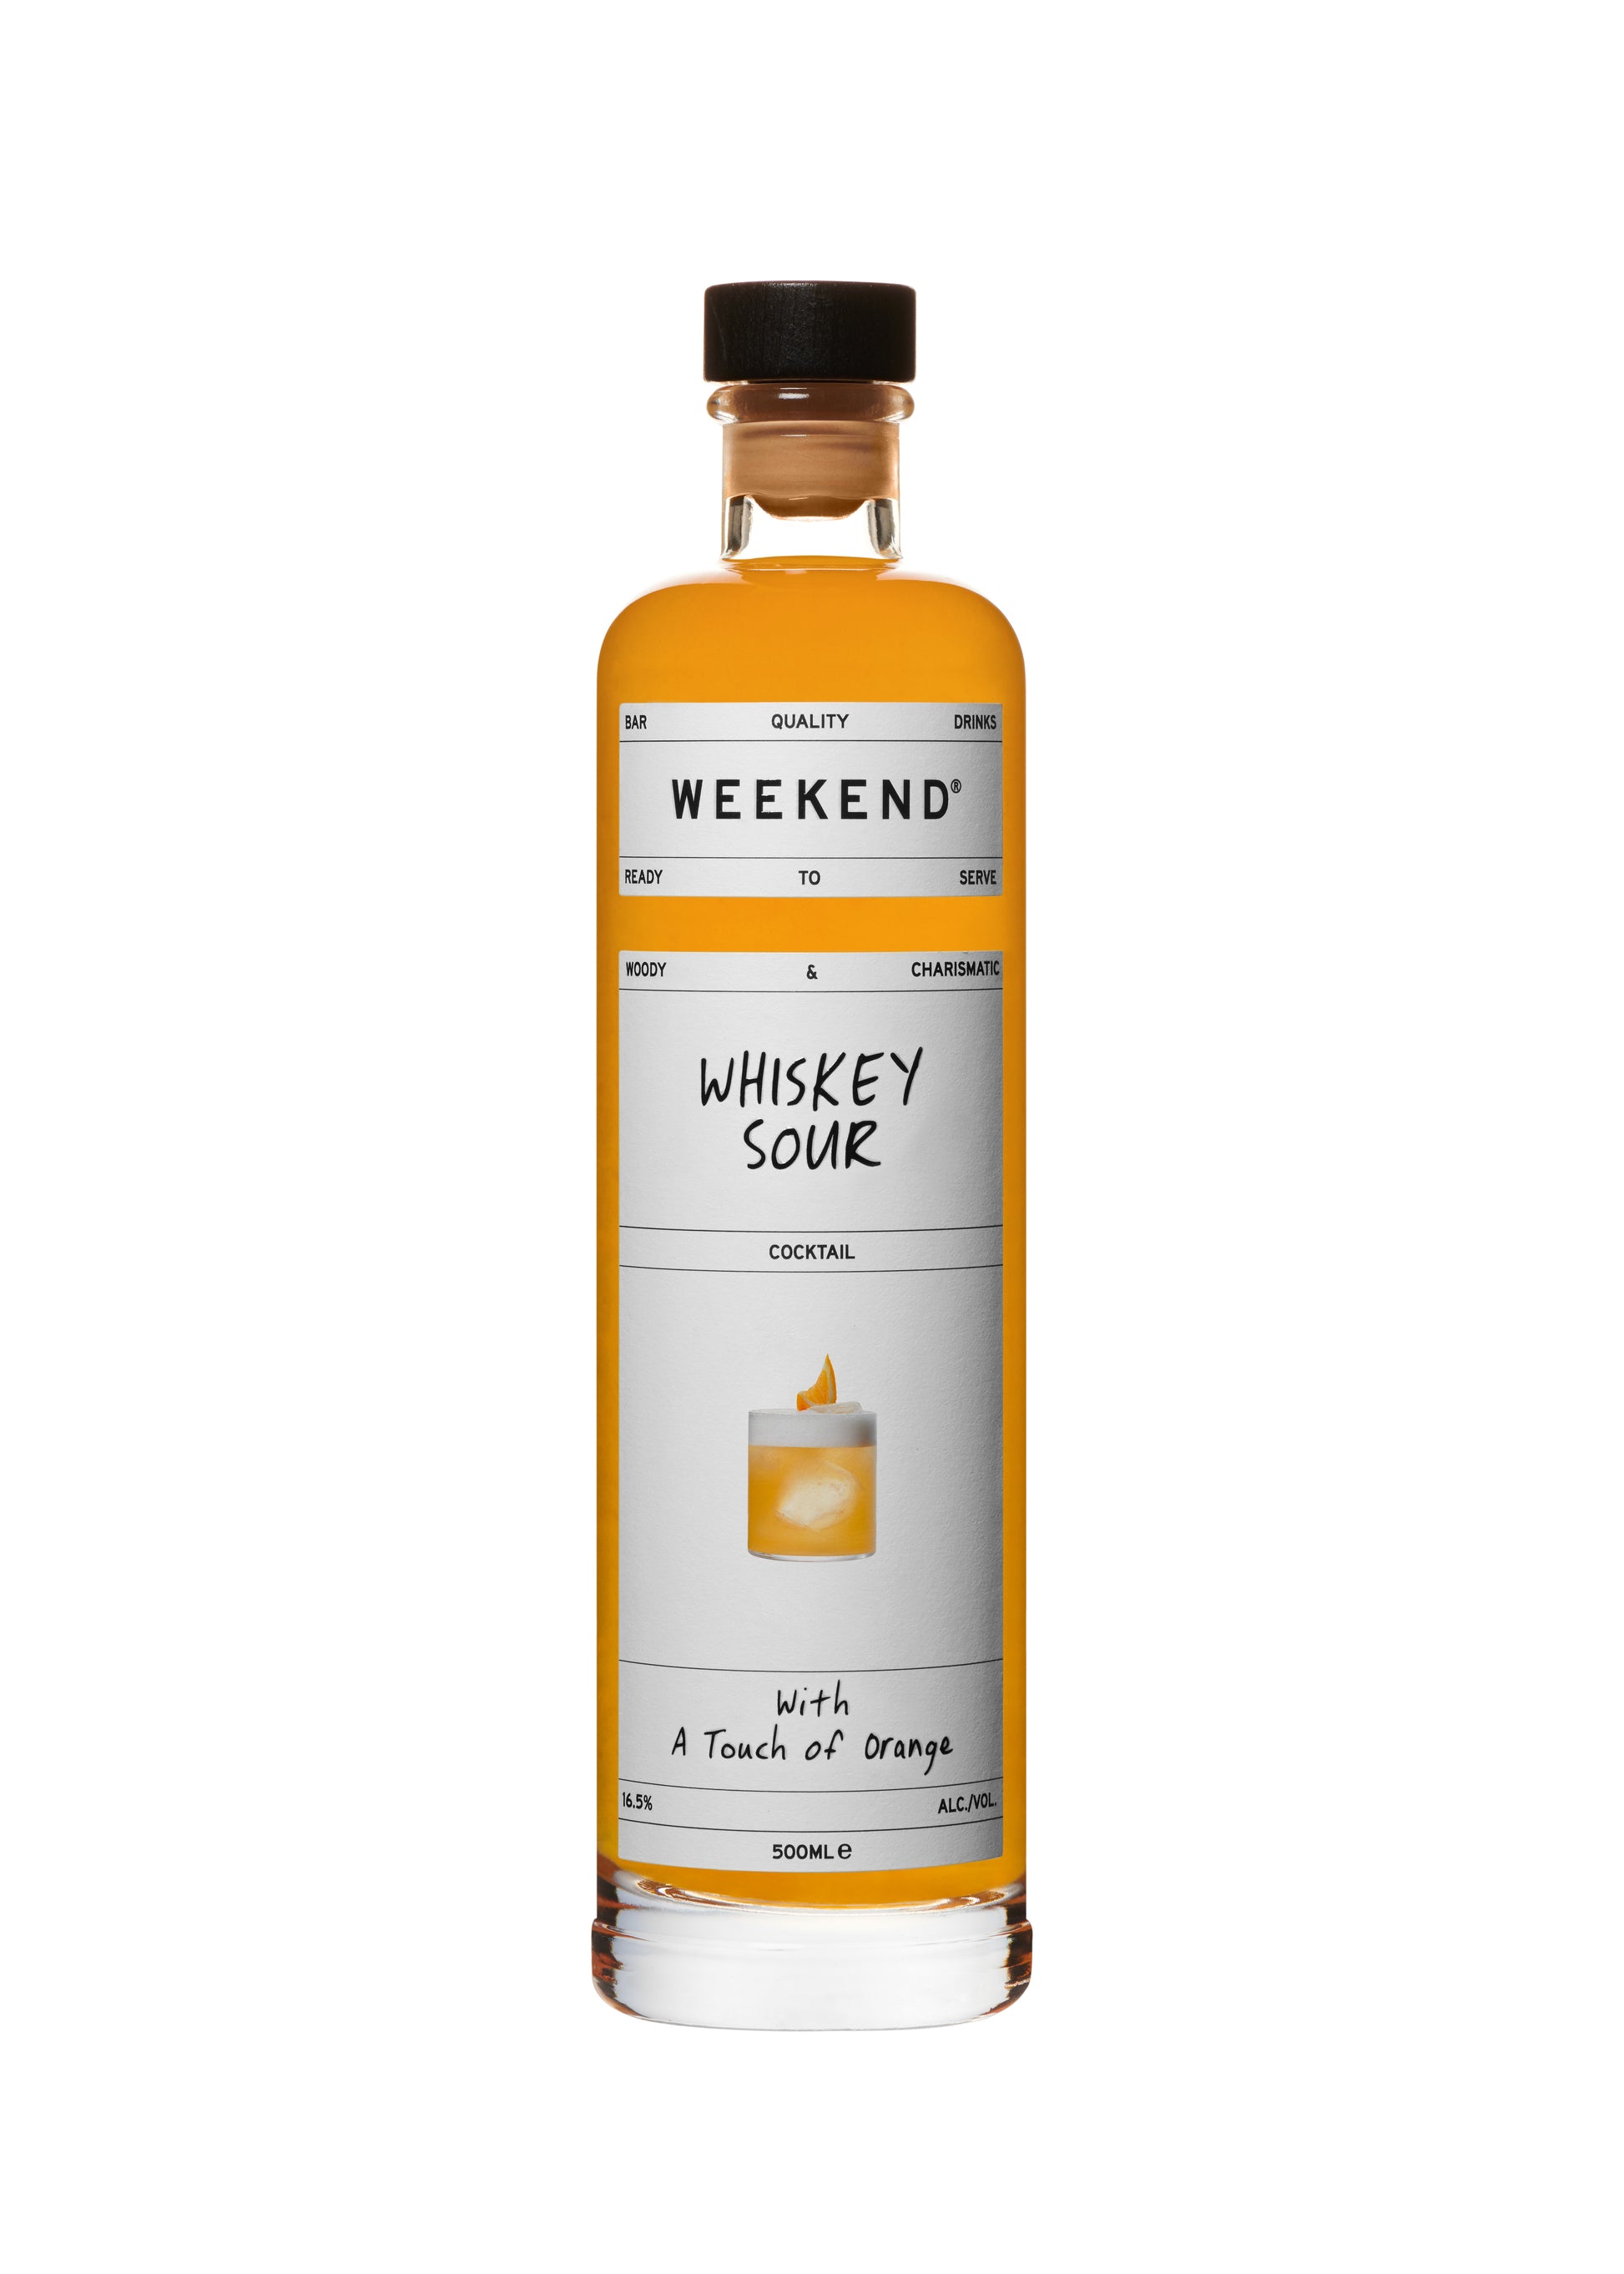 Pre-mixed whiskey sour cocktail in a bottle